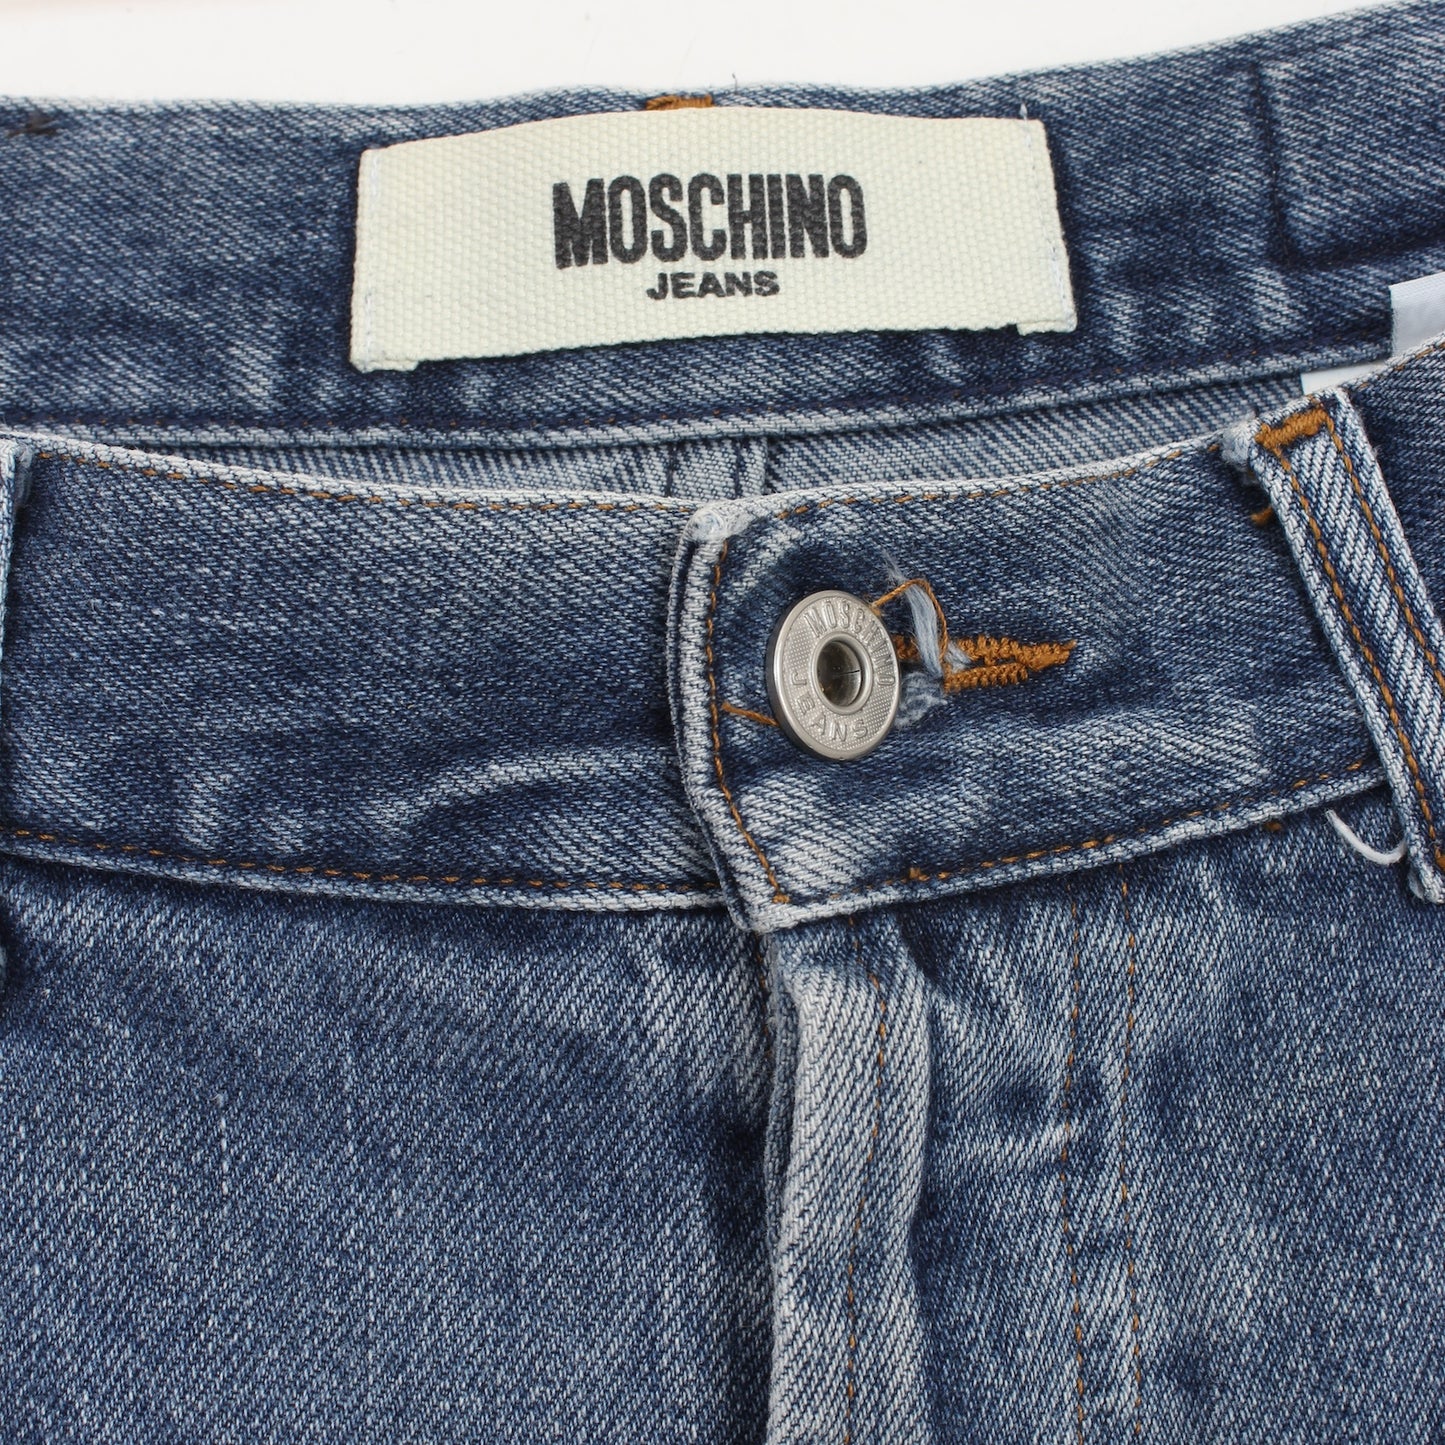 Moschino Patchwork Blue Jeans 2000s